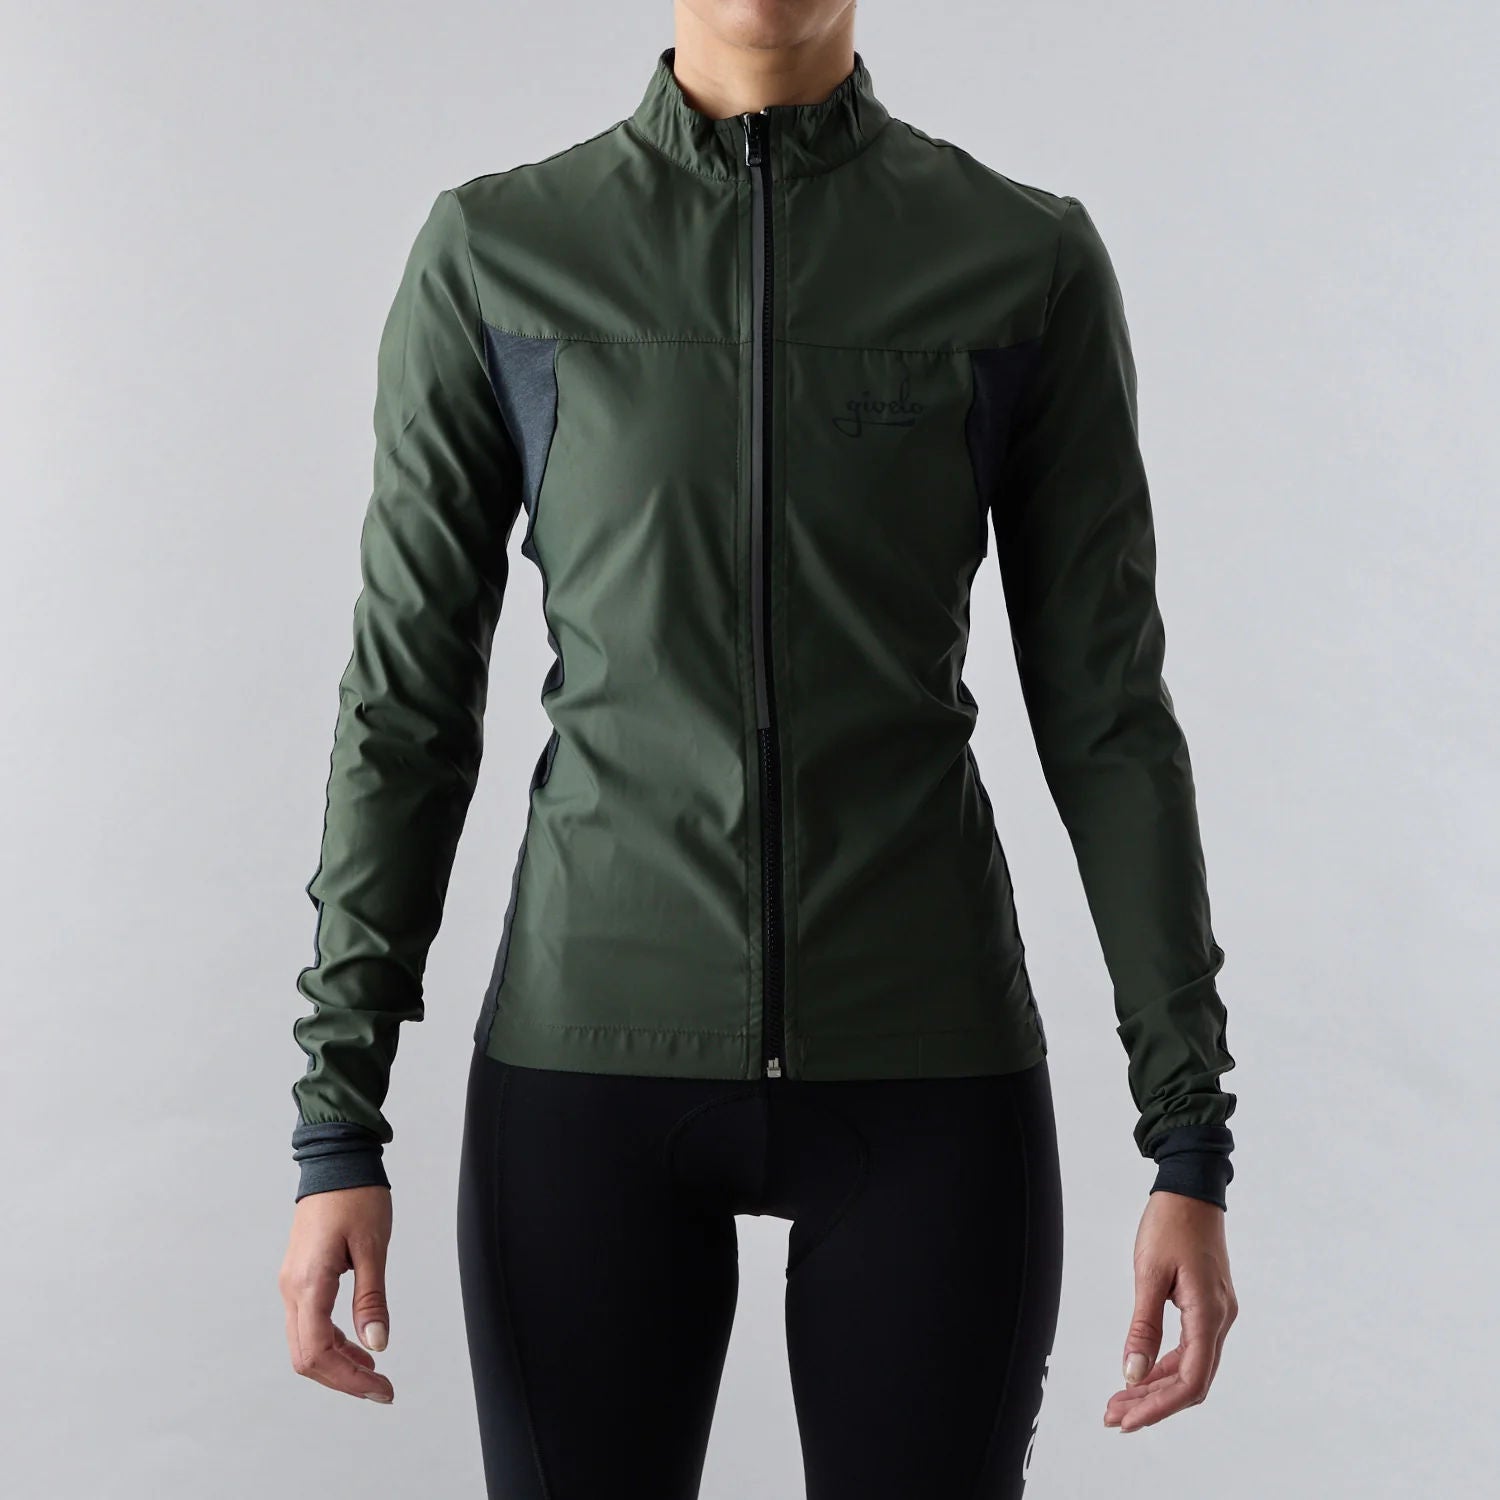 Givelo Military Green Quick Free レディース サイクル ウィンドジャケット | GEARED